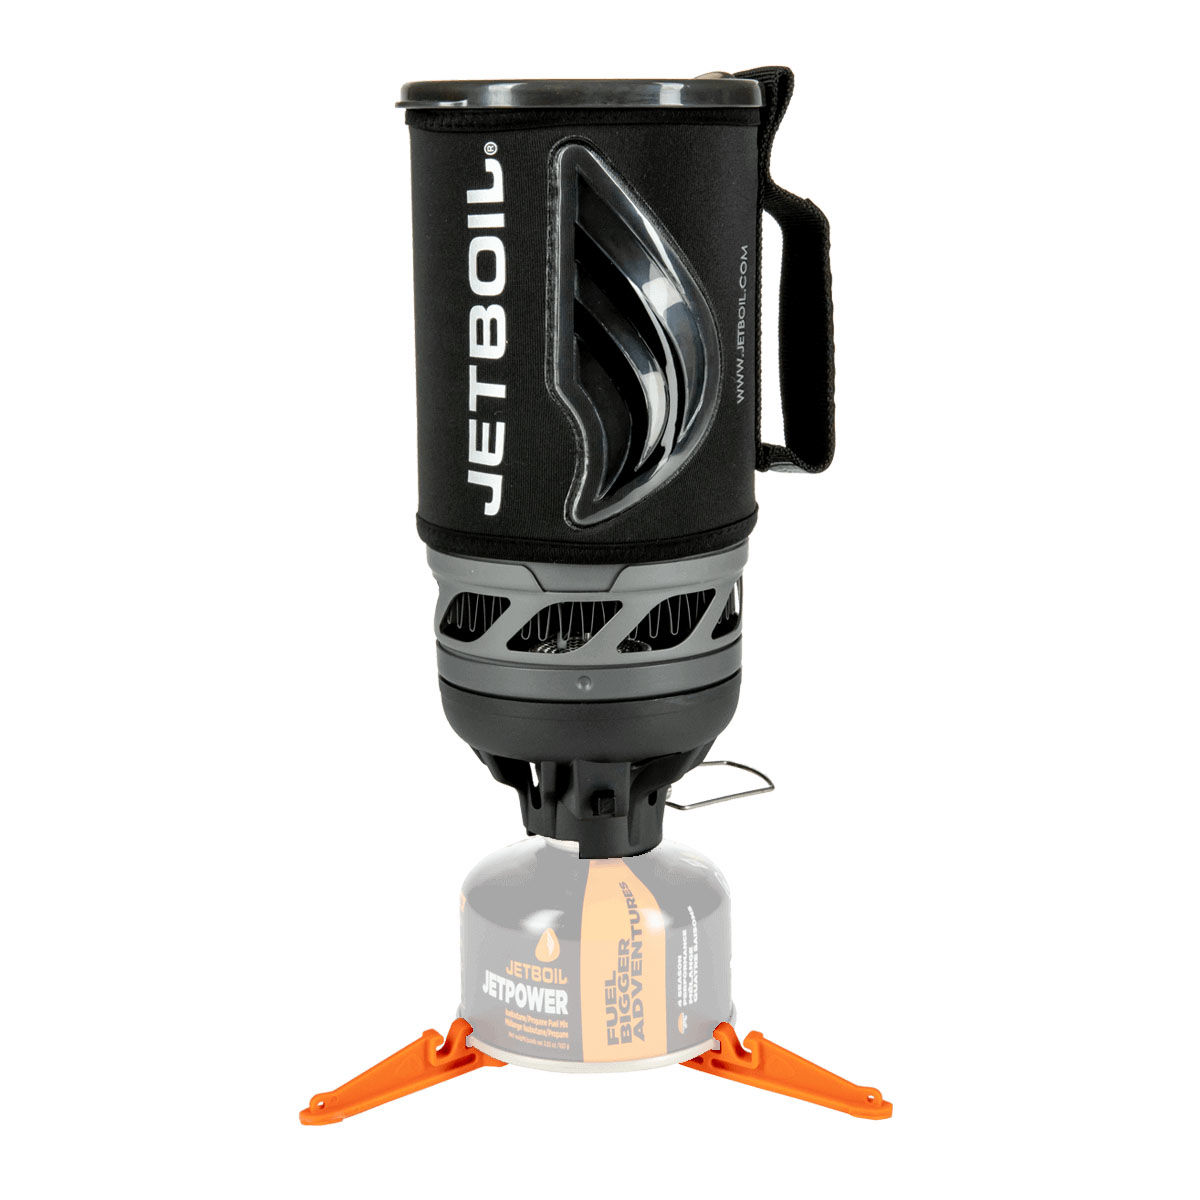 Jetboil Flash 1L gas cooking system